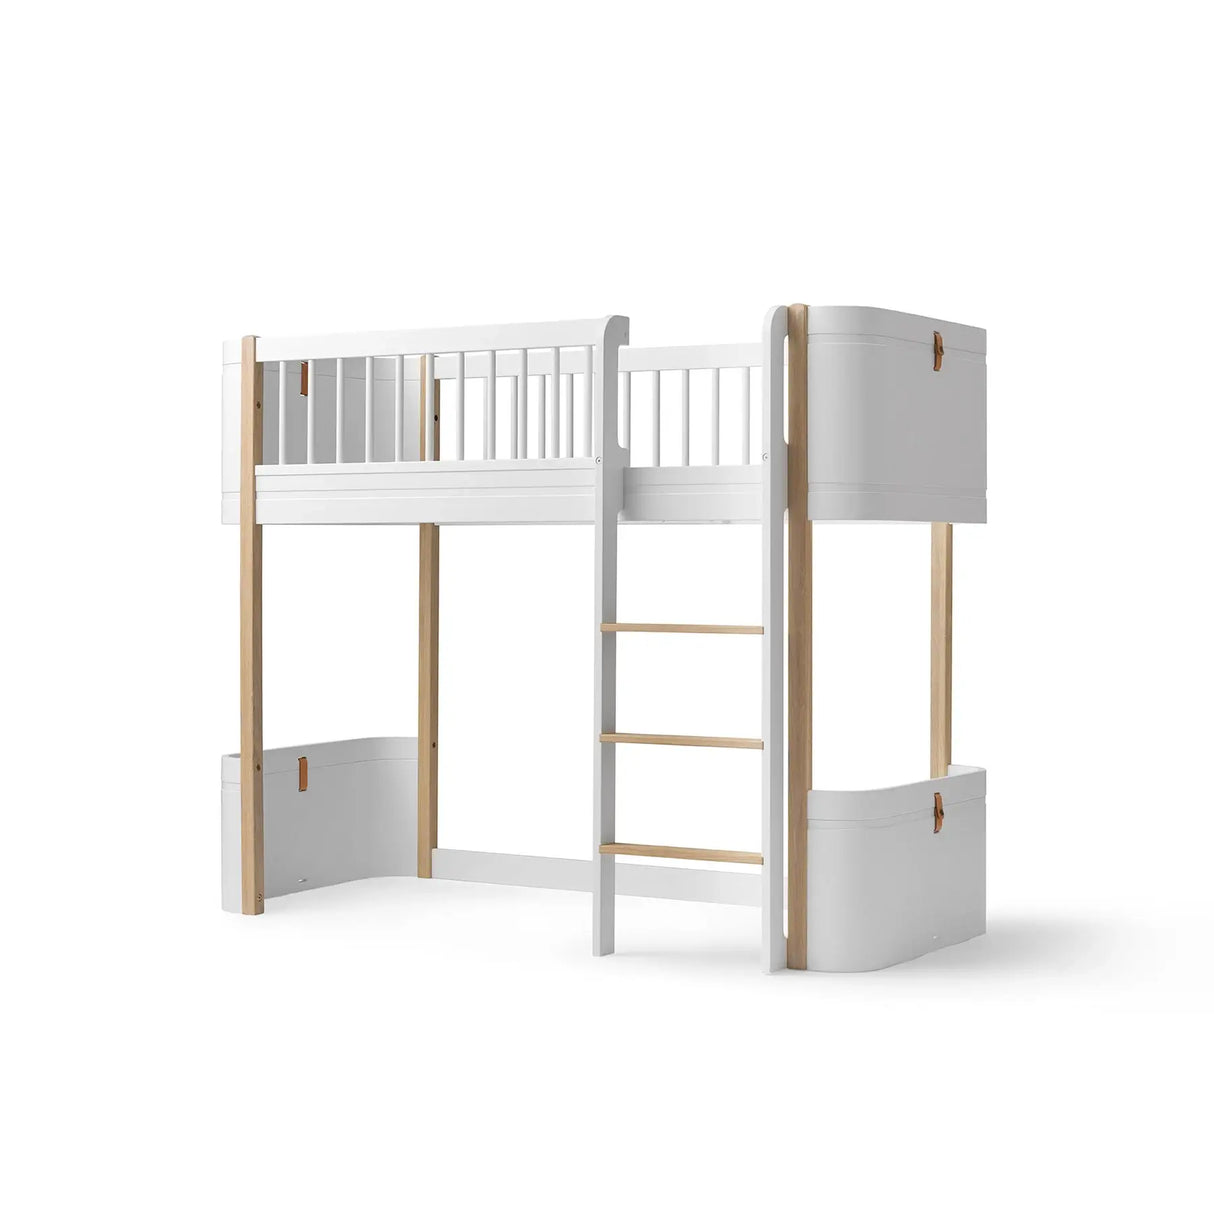 FREE Installation - Oliver Furniture Wood Mini+ Low Loft Bed in White/Oak - Little Snoozes